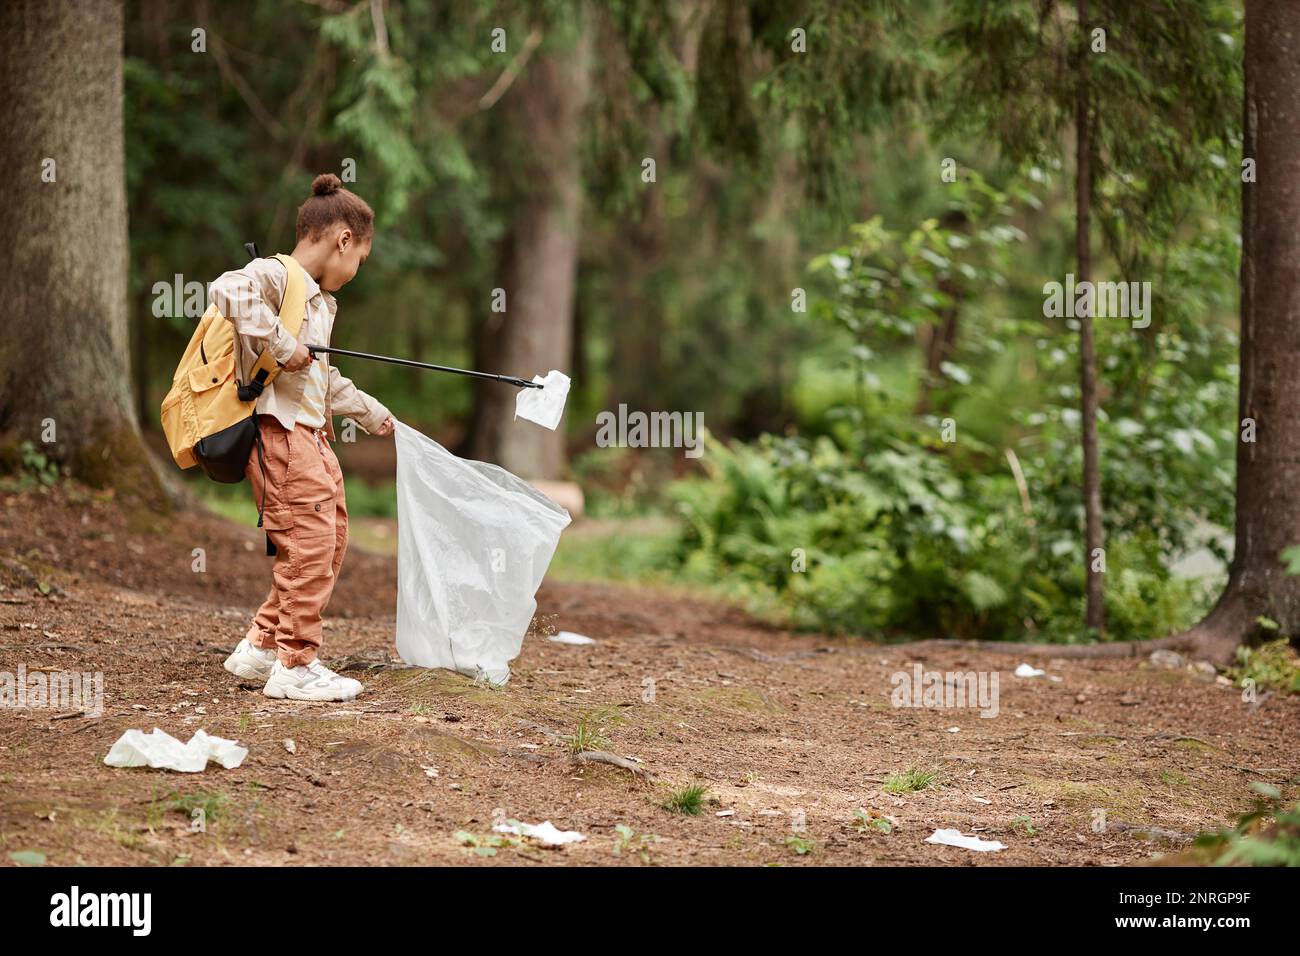 Side view portrait of eco activist little girl picking up plastic bottles in nature trail, copy space Stock Photo